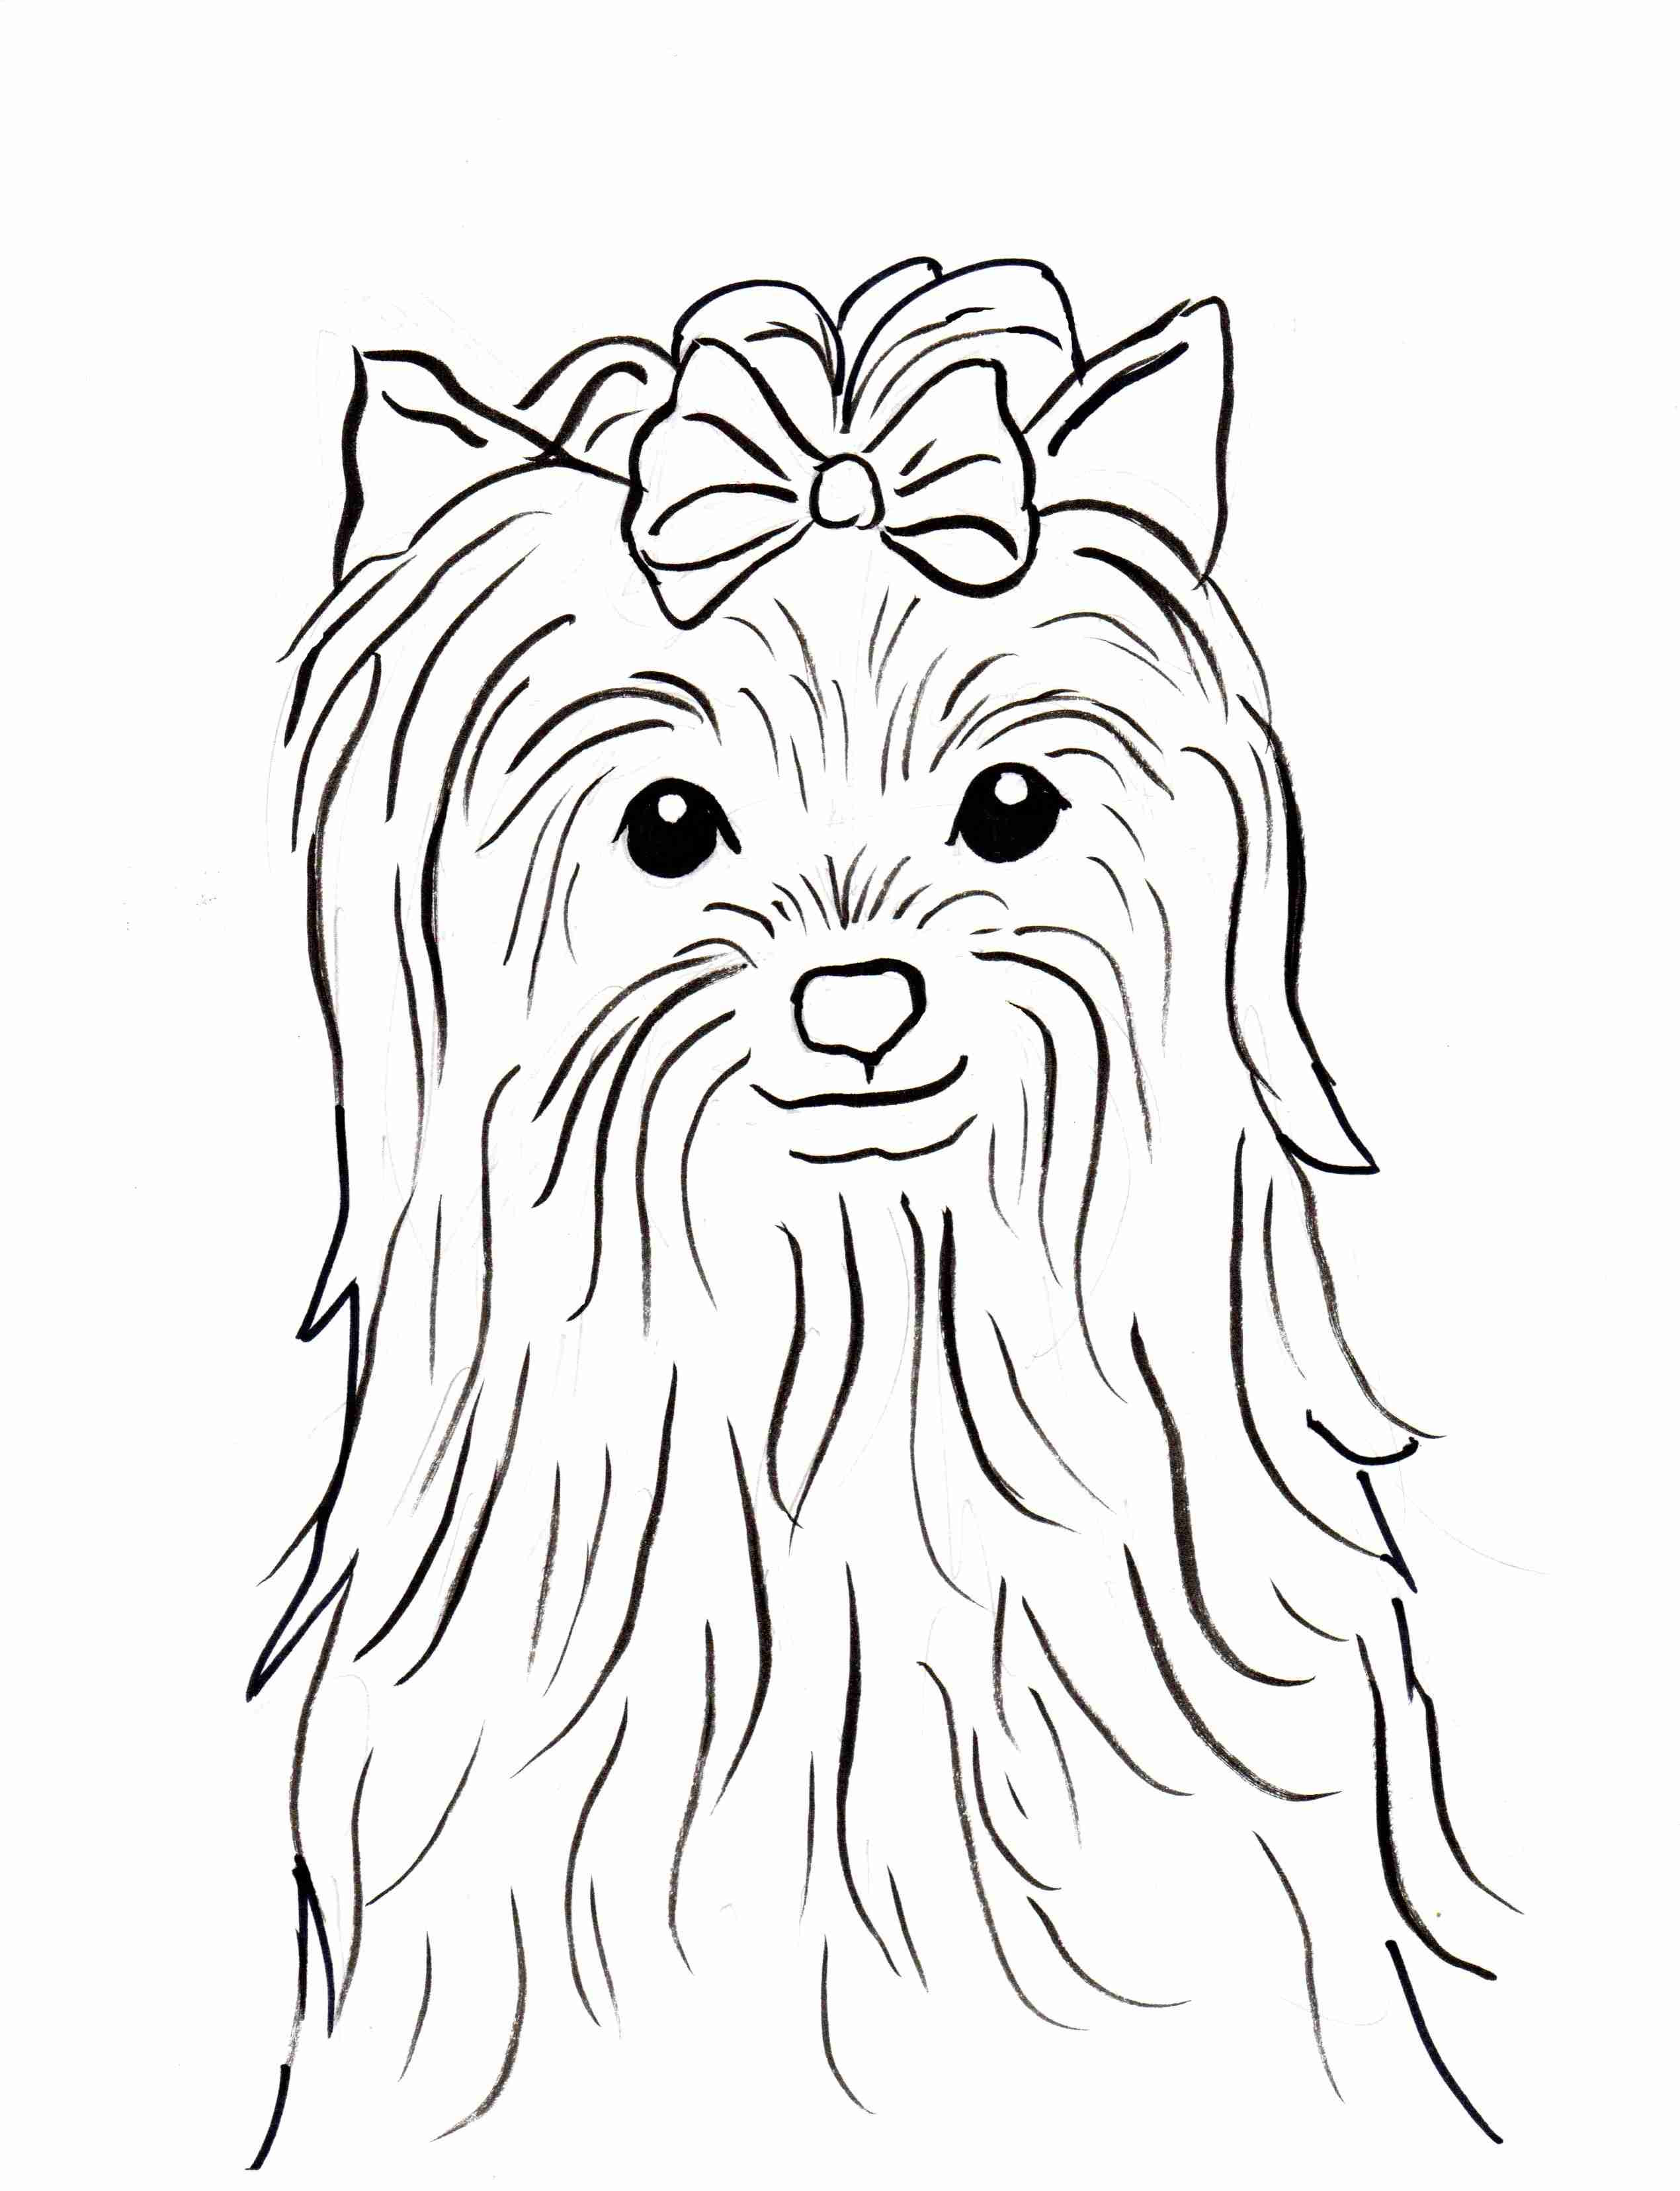 Yorkie Dog Coloring Pages at GetColorings.com | Free ...